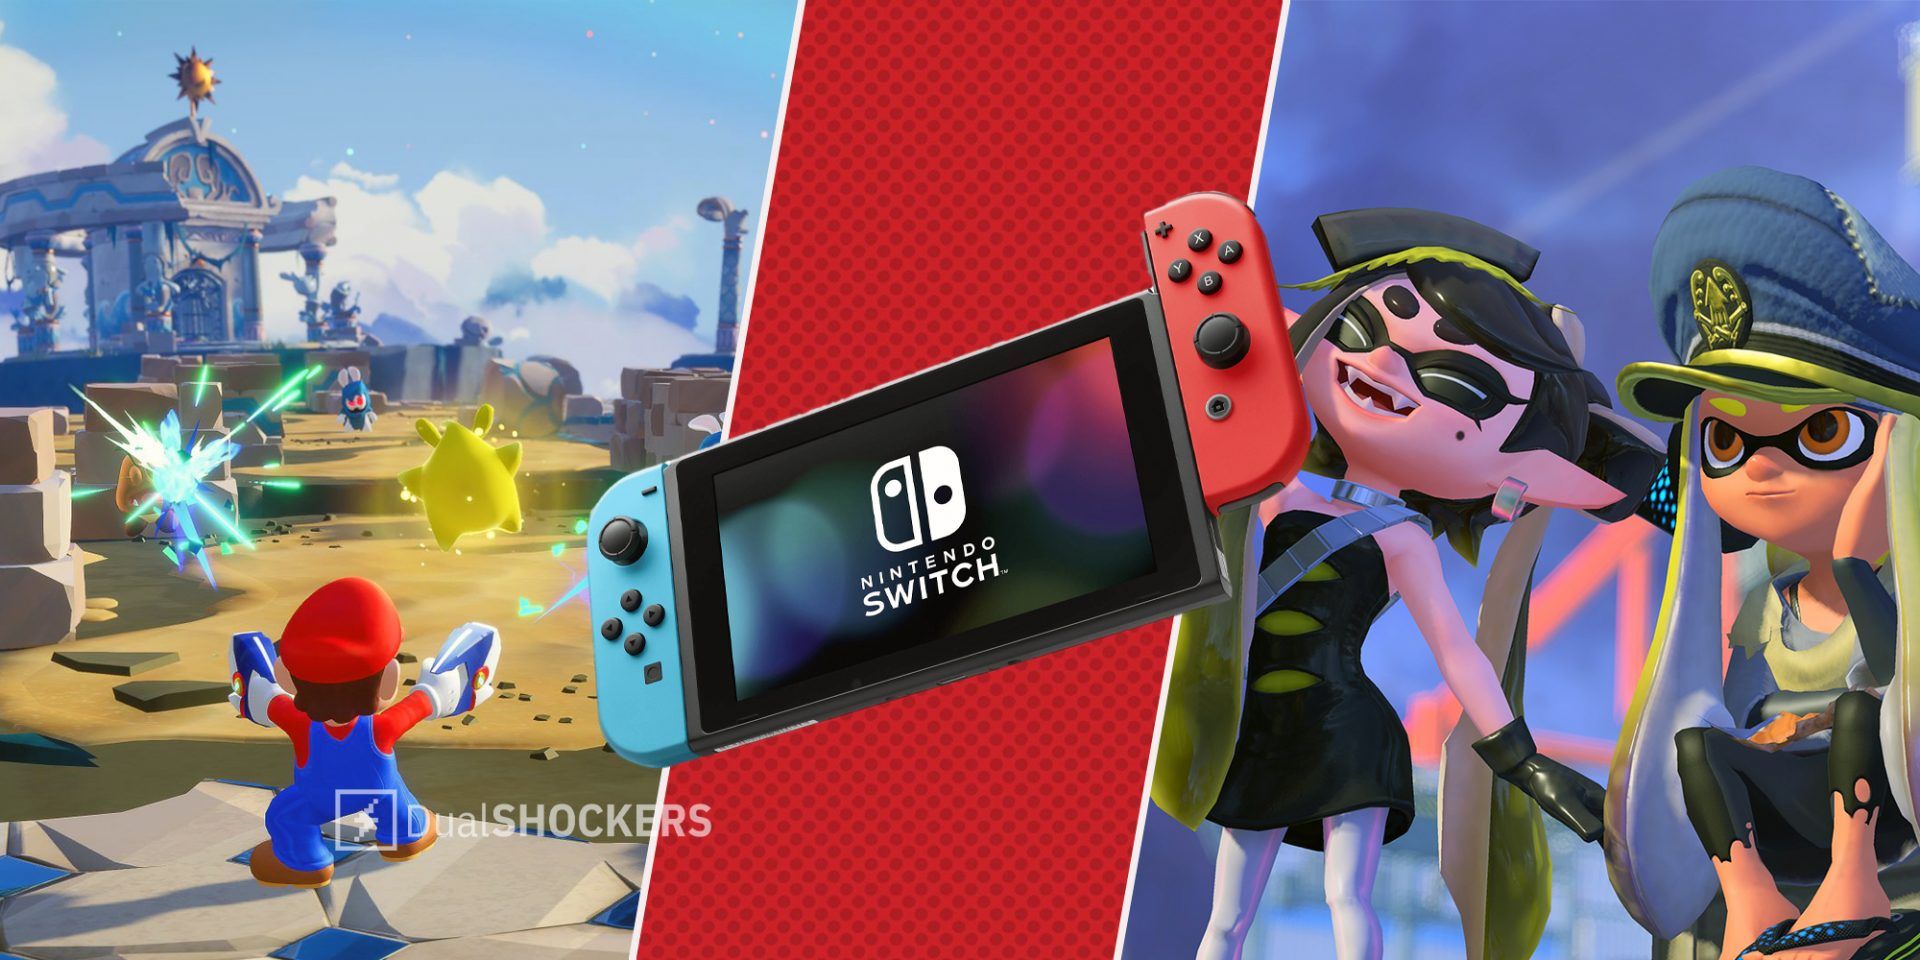 Mario + Rabbids Sparks of Hope new game on left, Nintendo Switch console in middle, Splatoon 3 on right